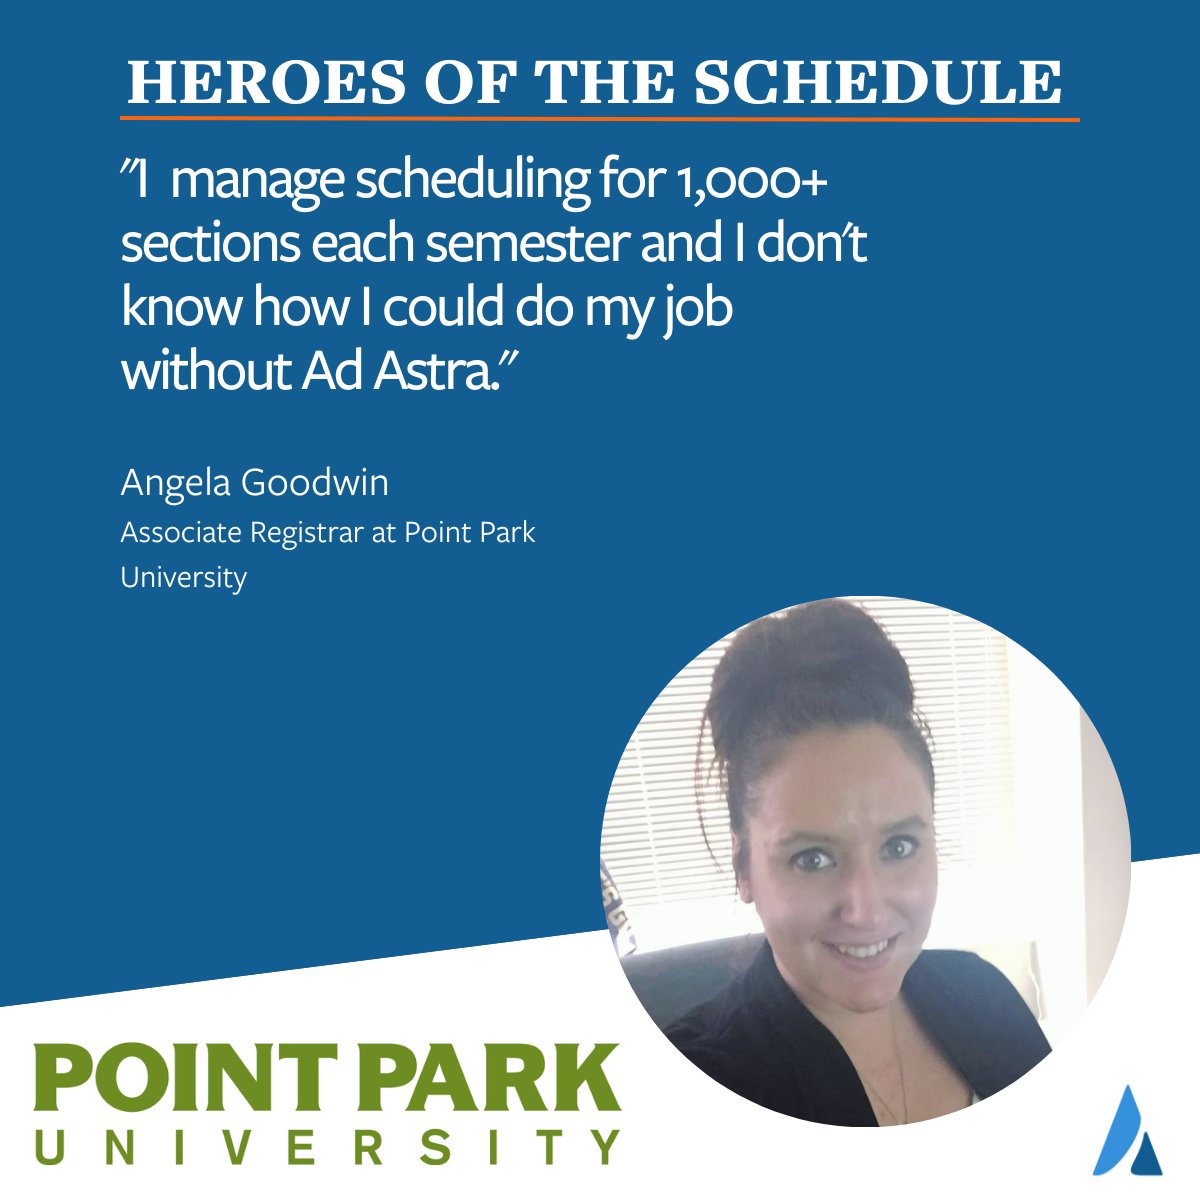 This week's Hero of the Schedule is Angela Goodwin of @PointParkU in Pittsburgh. At a school that specializes in dance and theater, Angela has her scheduling work cut out for her in order to accommodate unique learning spaces. She treats it like a game of Tetris. 😃